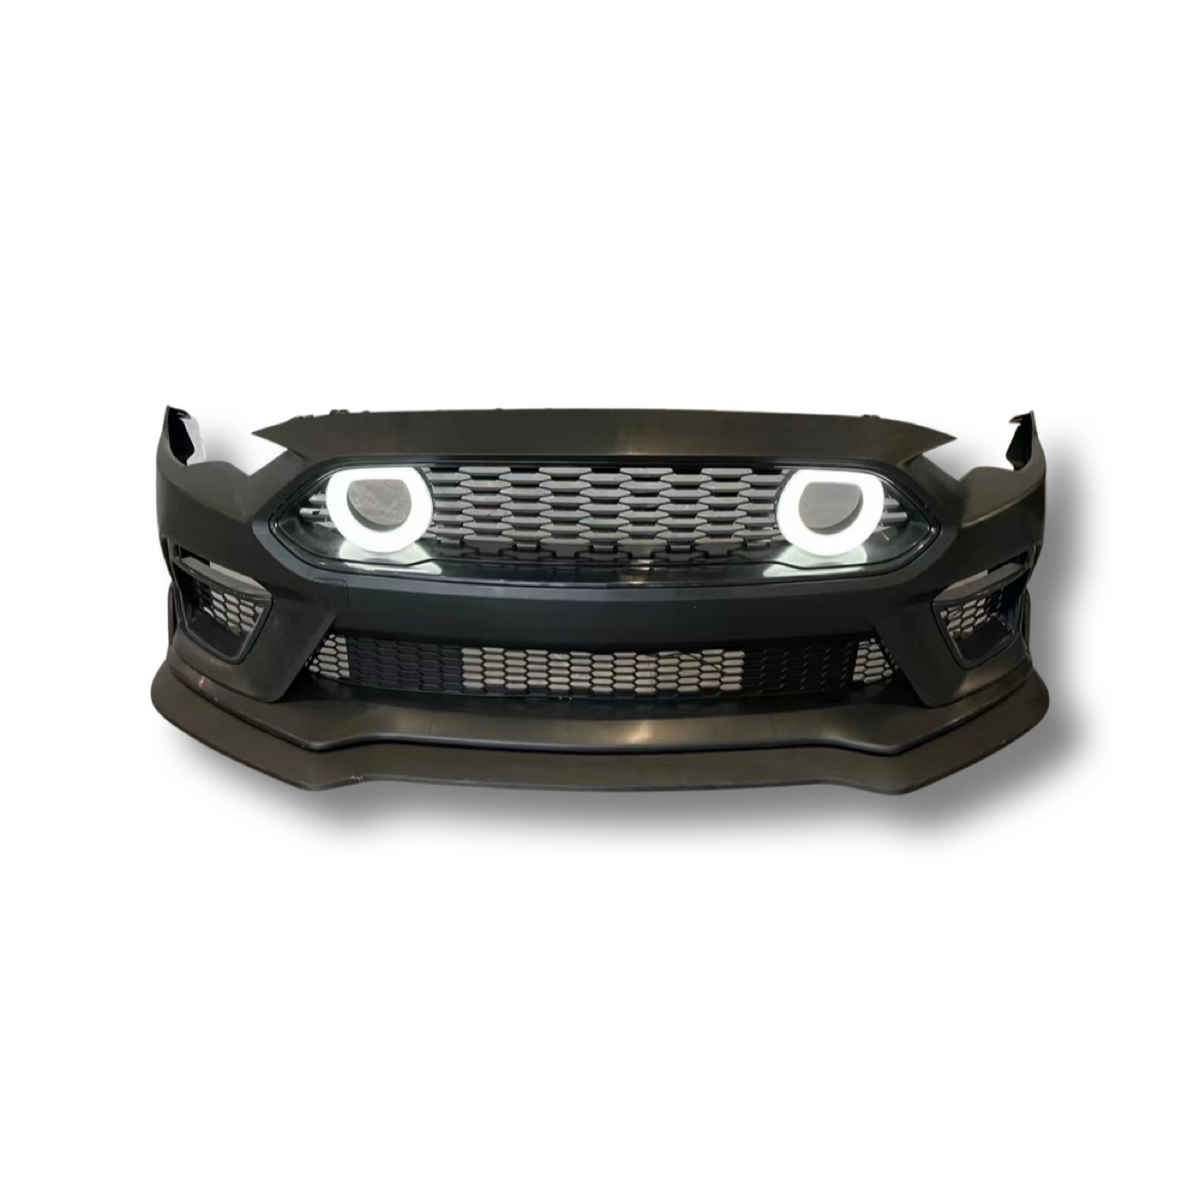 Mustang Mach 1 Style Bumper With Grille Lights 2015-17